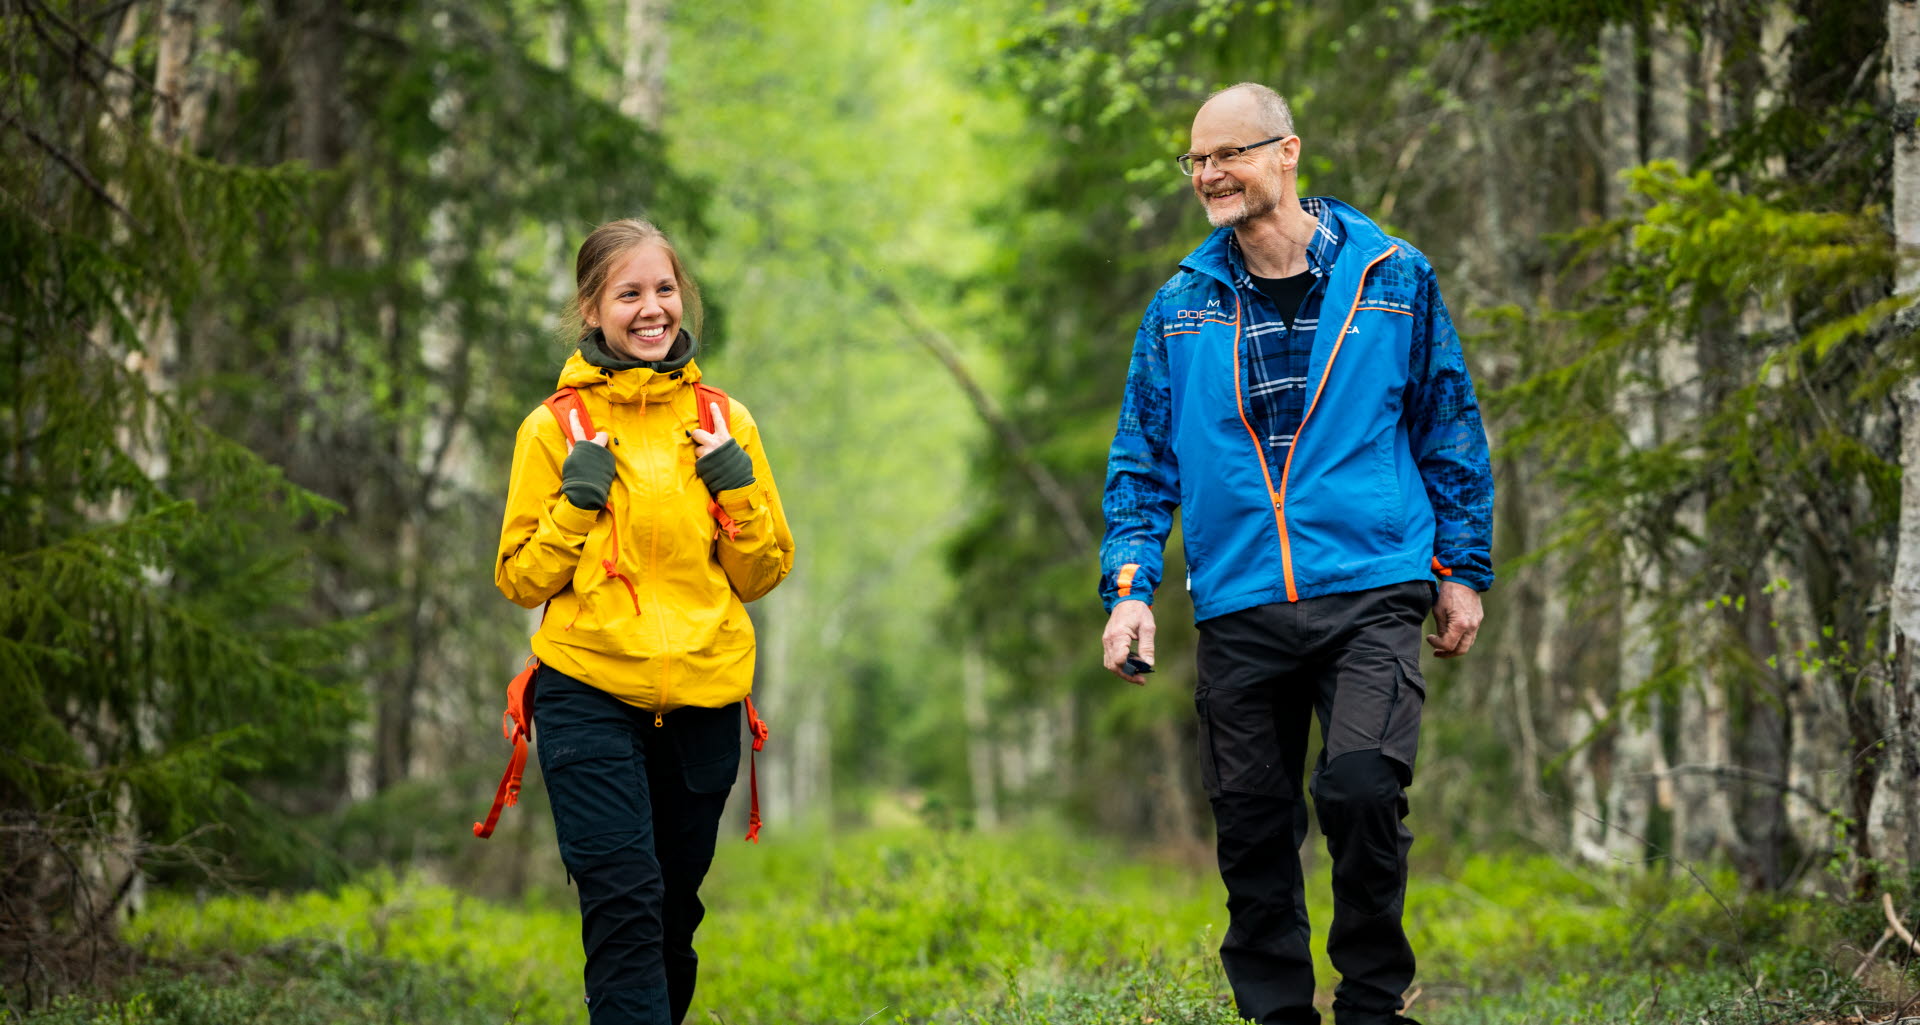 Two people walking in a forest, seen from the front.